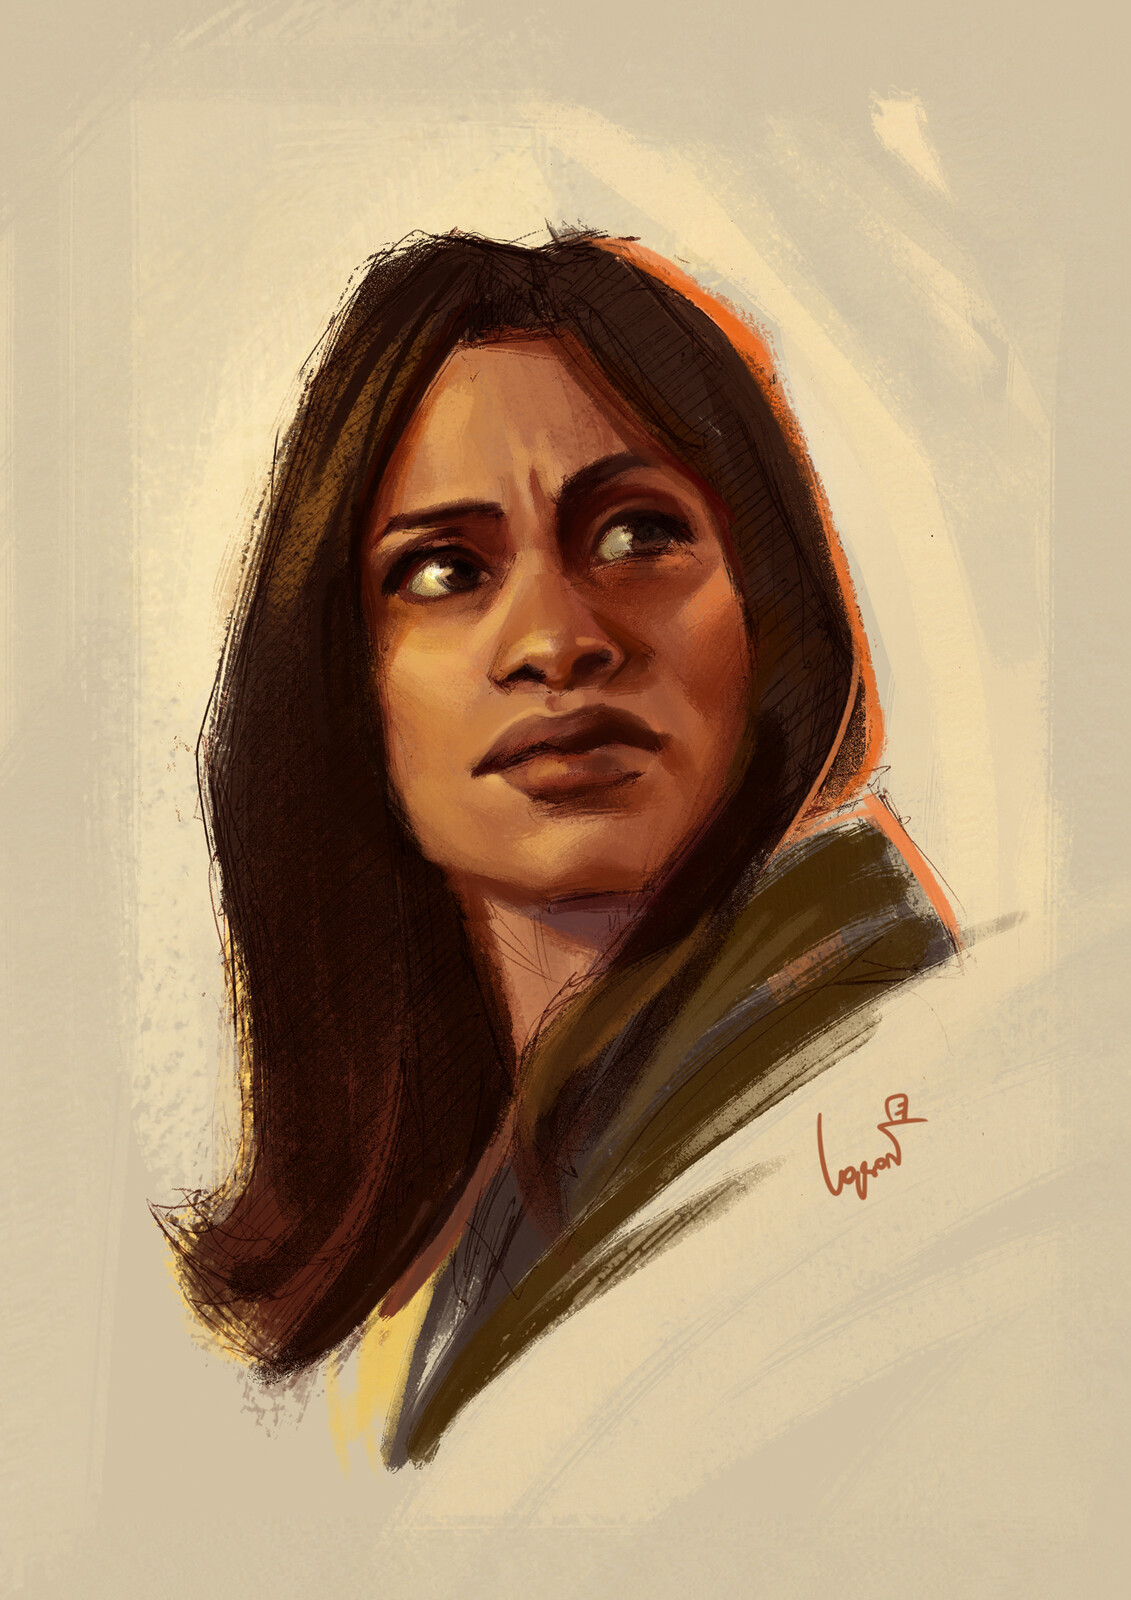 Claire from Luke Cage series